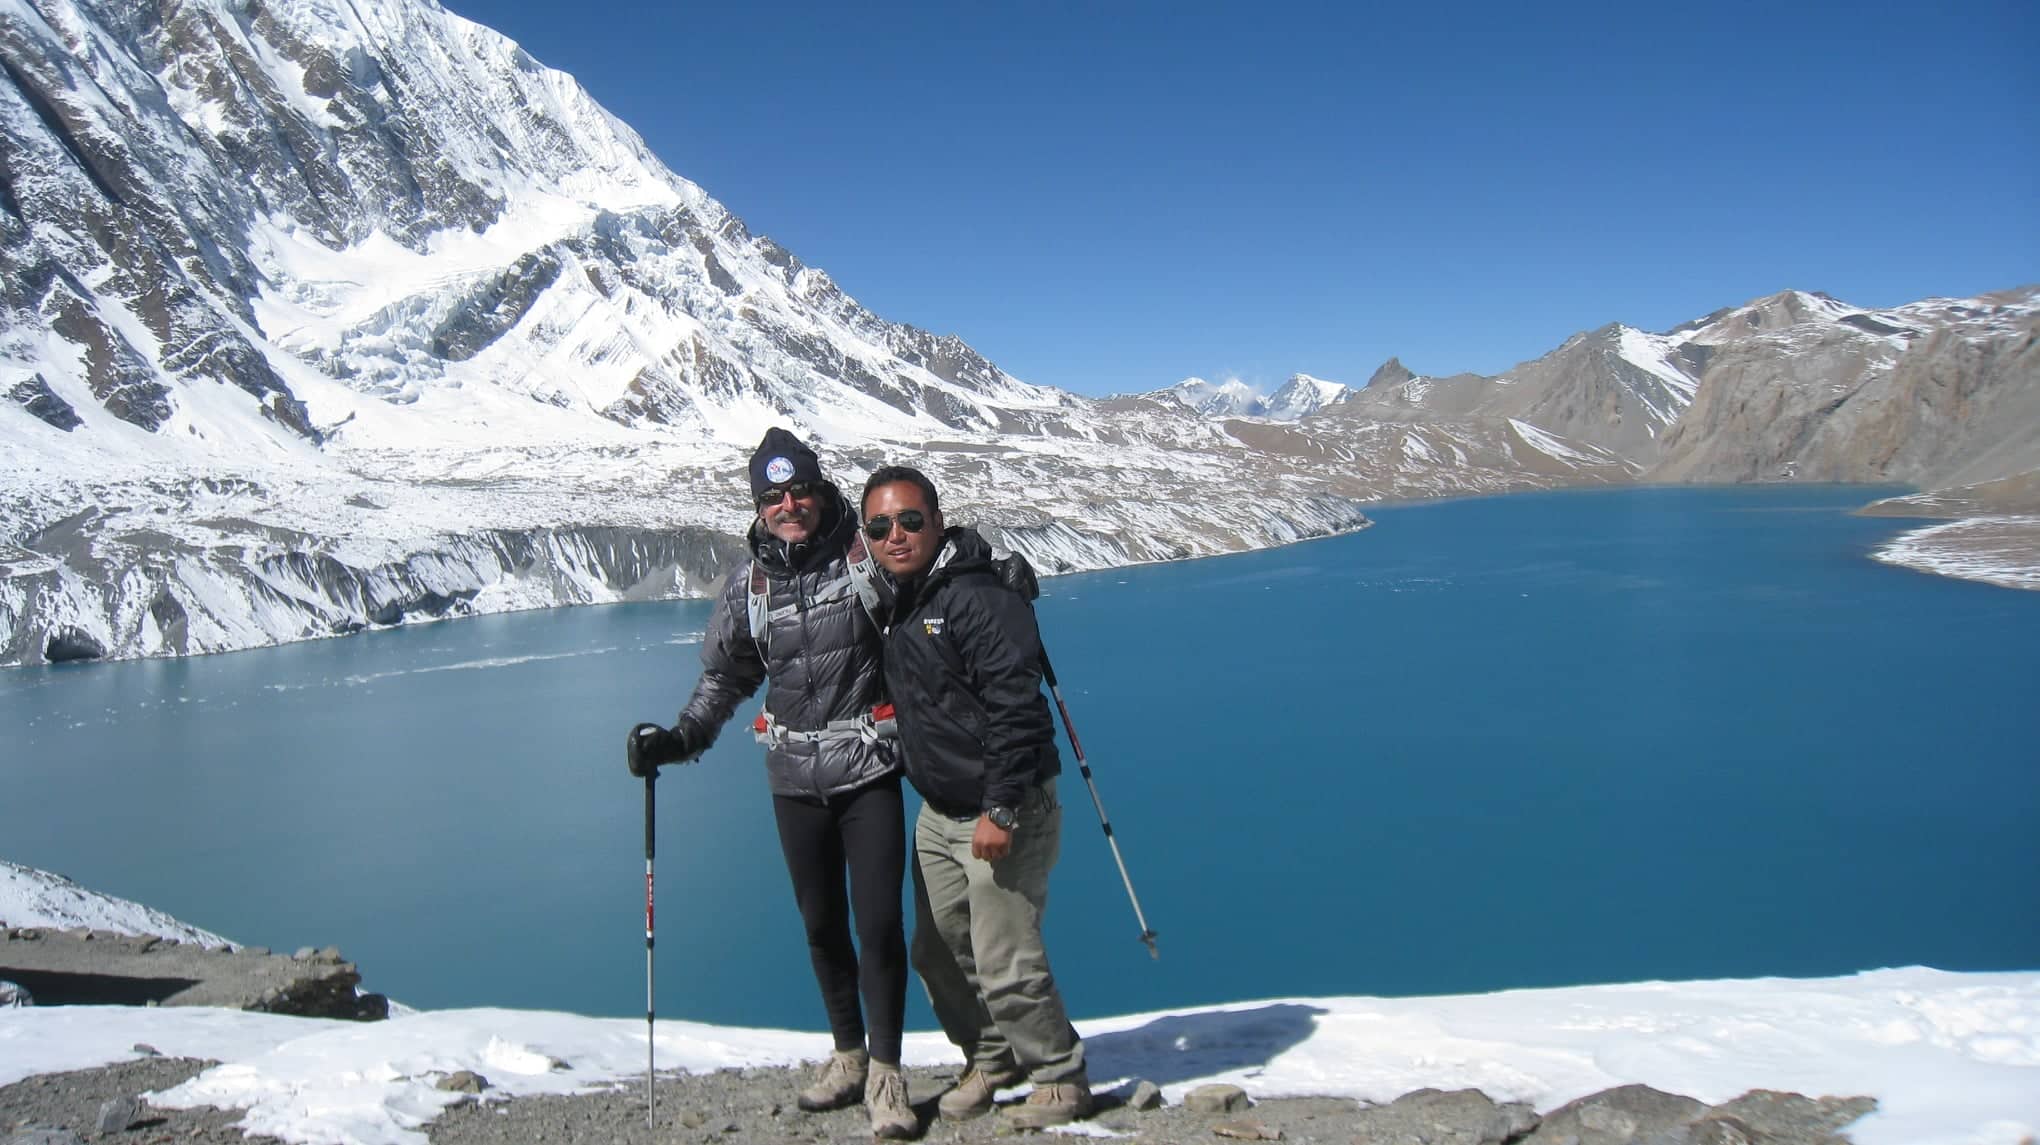 Round Annapurna with Tilicho Taal